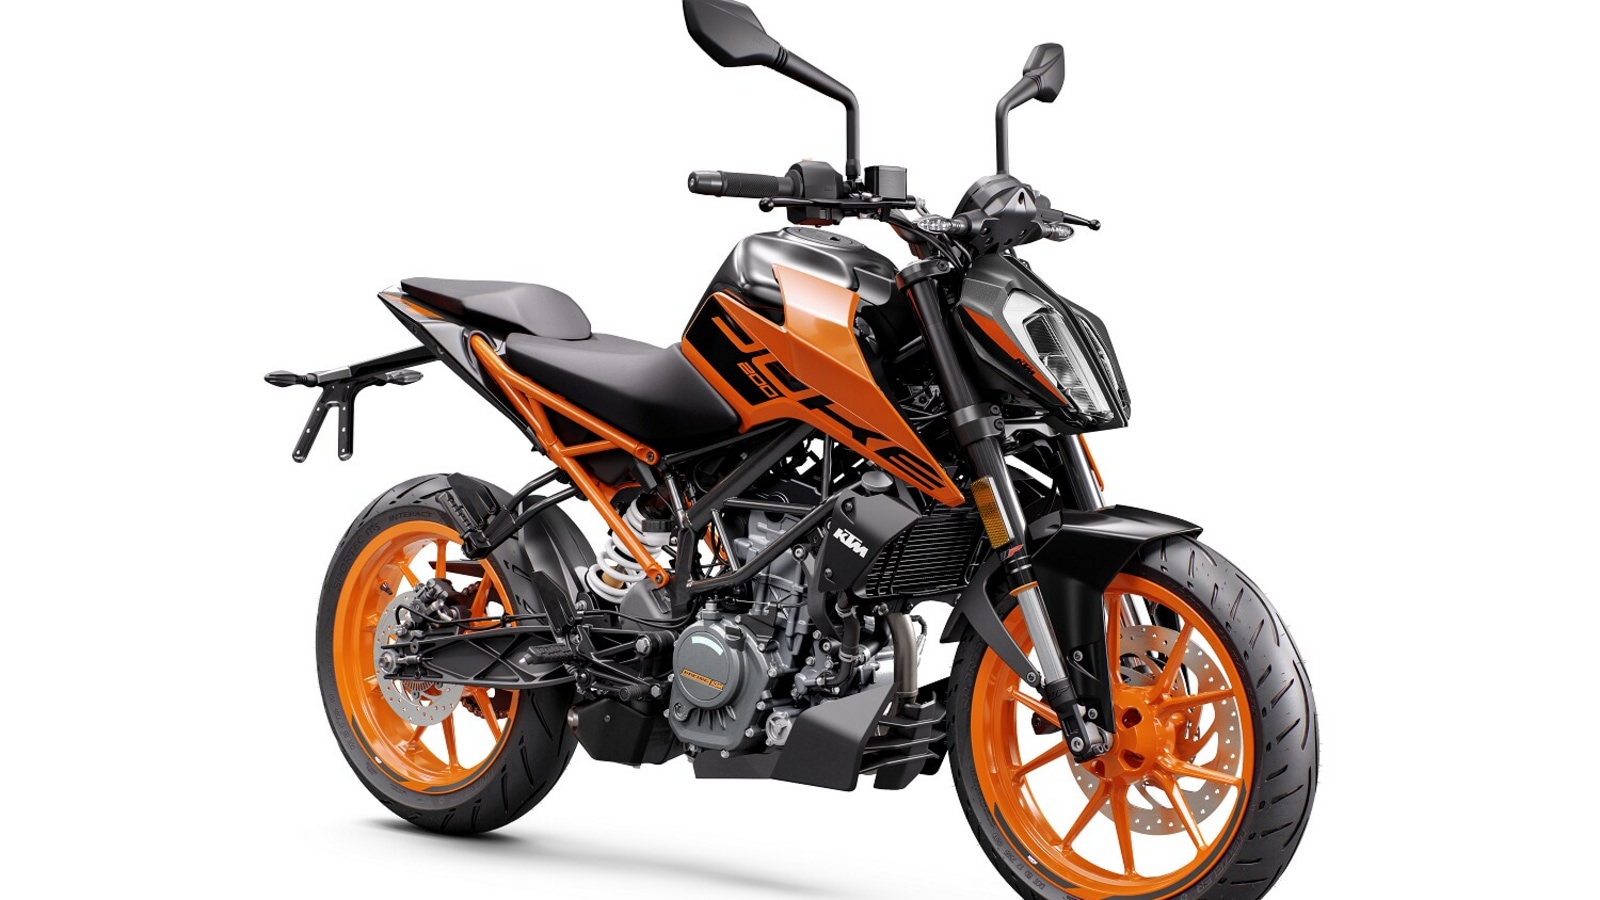 KTM DUKE 200 - SET DECAL - STICKERS OEM - includes all stickers | eBay